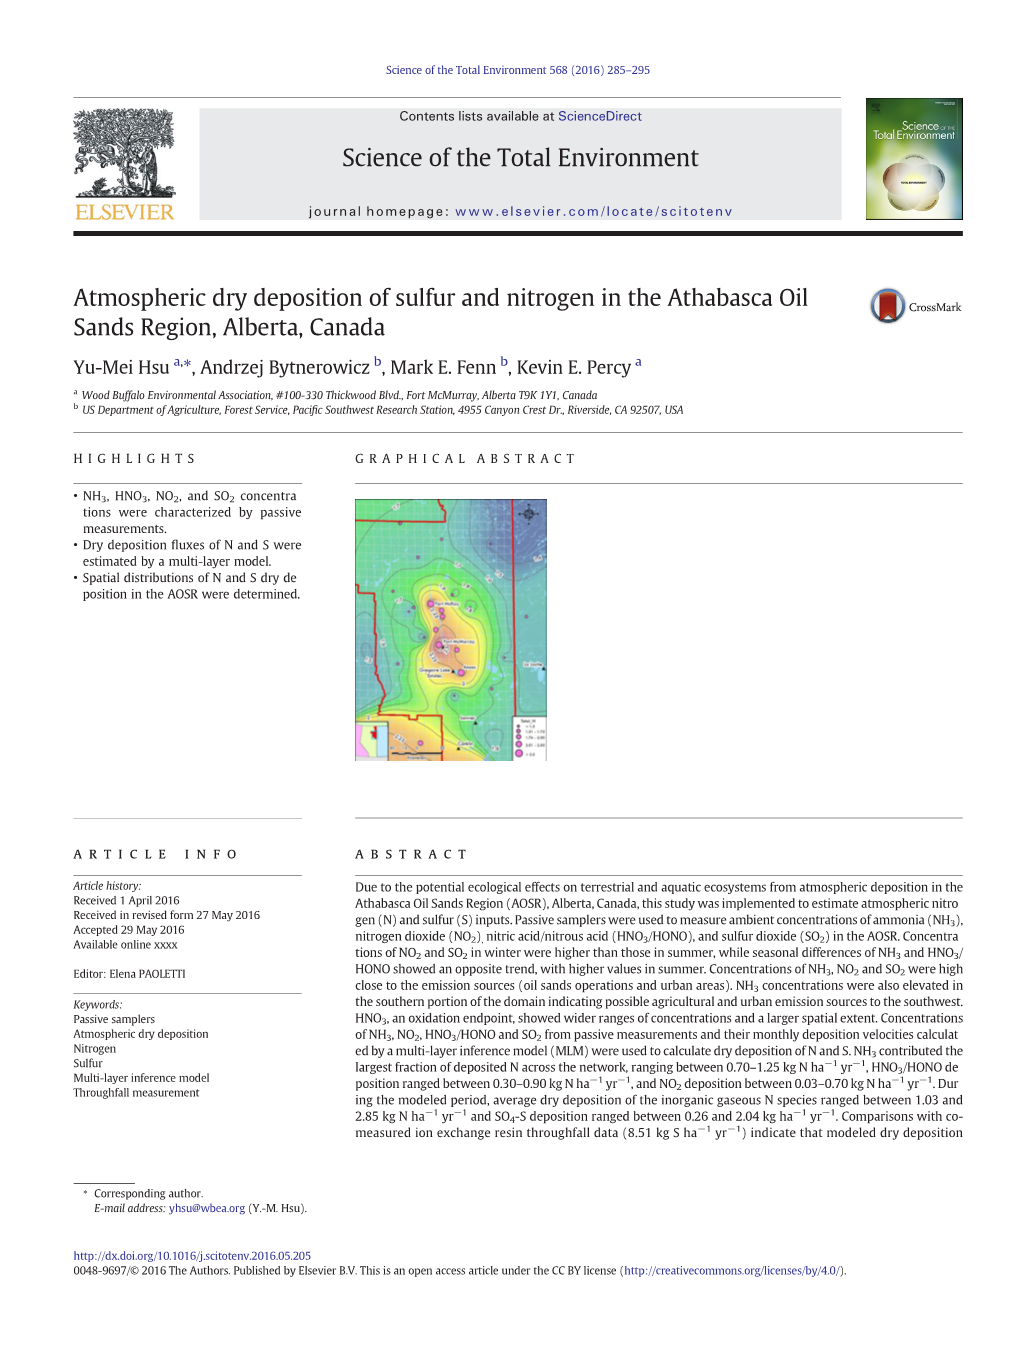 Atmospheric Dry Deposition of Sulfur and Nitrogen in the Athabasca Oil Sands Region, Alberta, Canada